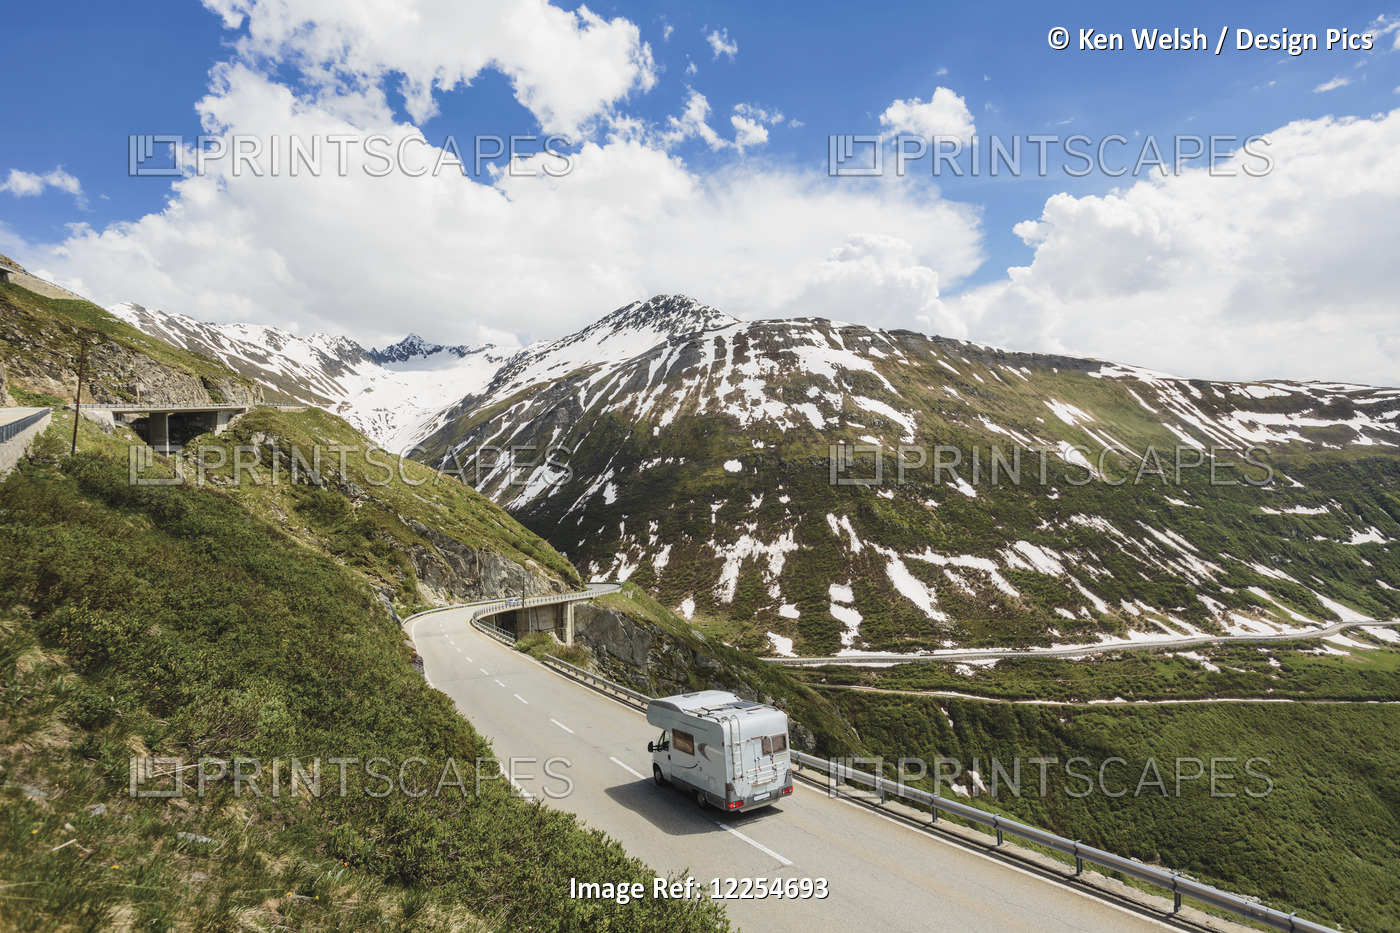 Motor Home On The Furka Pass Road In The Swiss Alps; Valais Canton, Switzerland